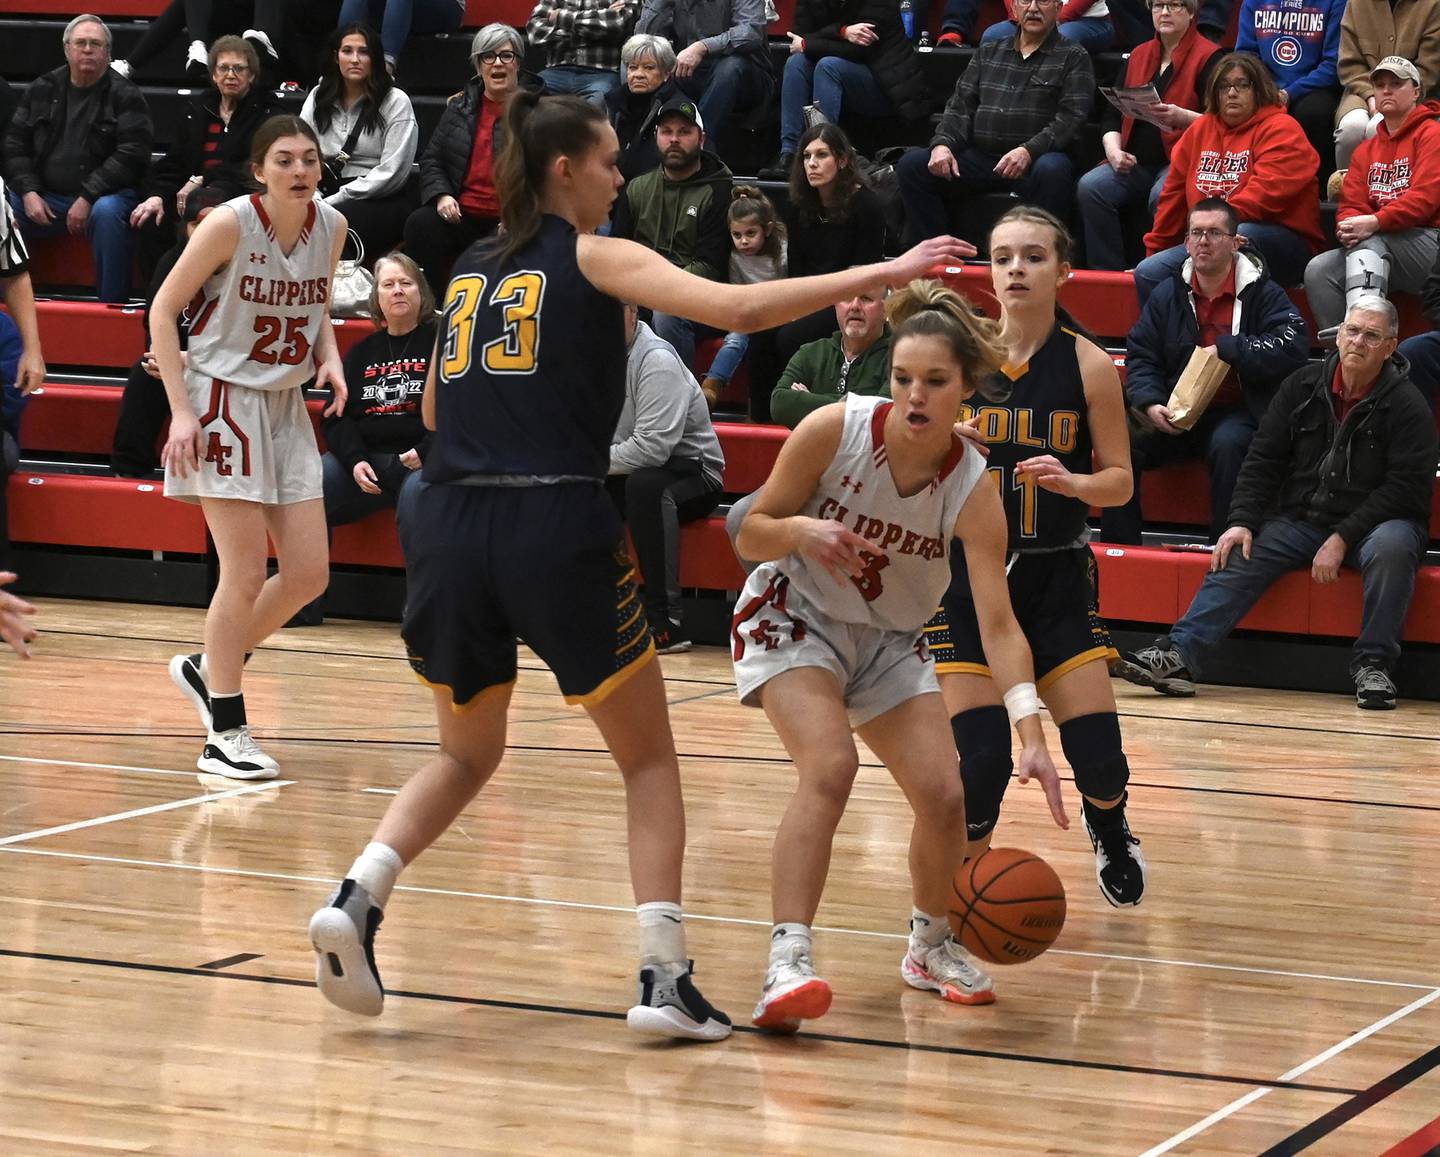 Amboy's Elly Jones (3) drives toward the basket while being defended by Polo's Lindee Poper (33) and Courtney Grobe (11) during the Class 1A Amboy Regional final Friday night.